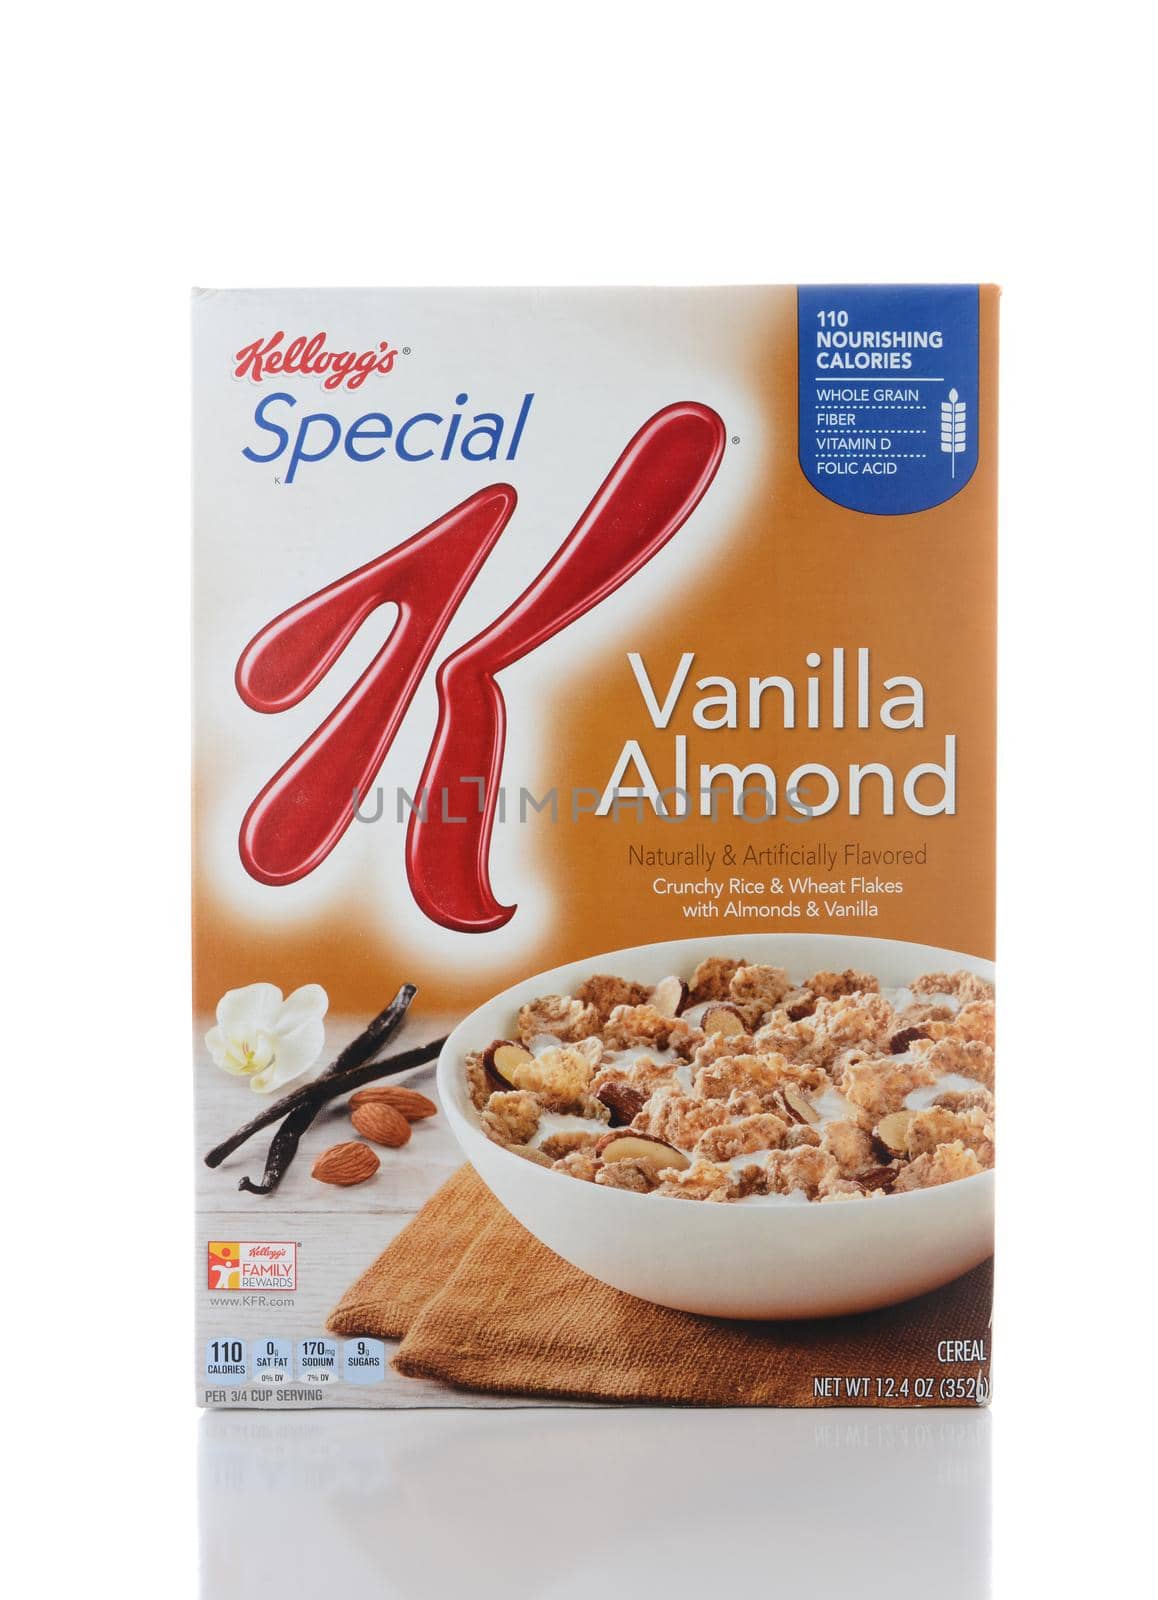 IRVINE, CA - JUNE 2, 2015: A box of Special K Vanilla Almond Cereal. Special K cereals, from Kellogg's of Battle Creek, Michigan, are  a low-fat cereal that can be eaten to help one lose weight.